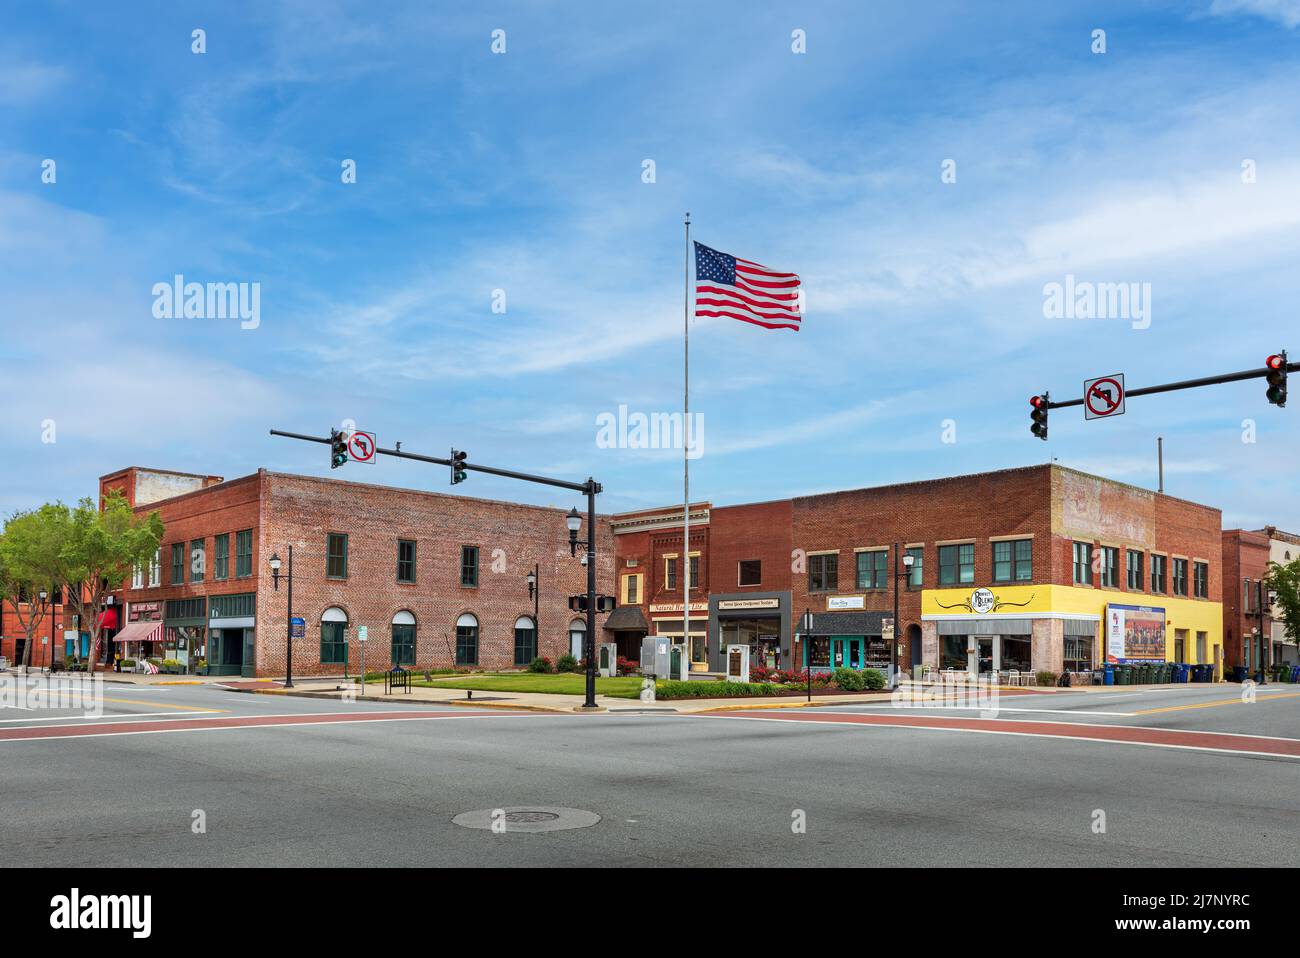 LEXINGTON, NC, USA-8 MAY 2022: Colorful wide angle view of street corner with small veterans memorial park and row of buildings on each side.  Promine Stock Photo